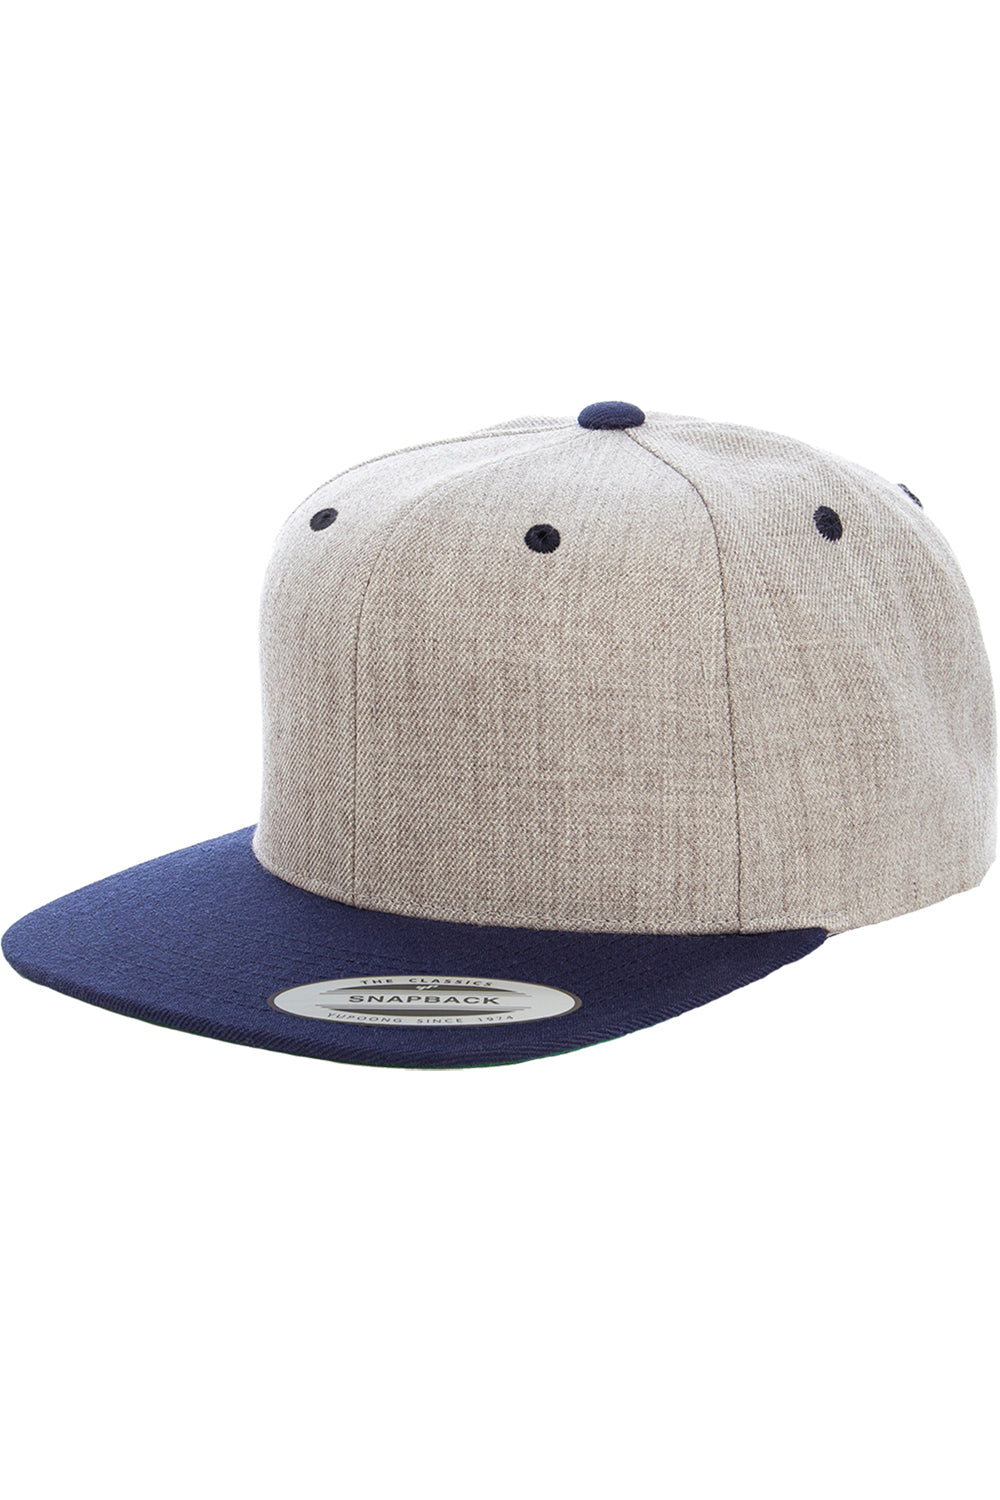 Yupoong 6089MT Mens Adjustable Hat Heather Grey/Navy Blue Front